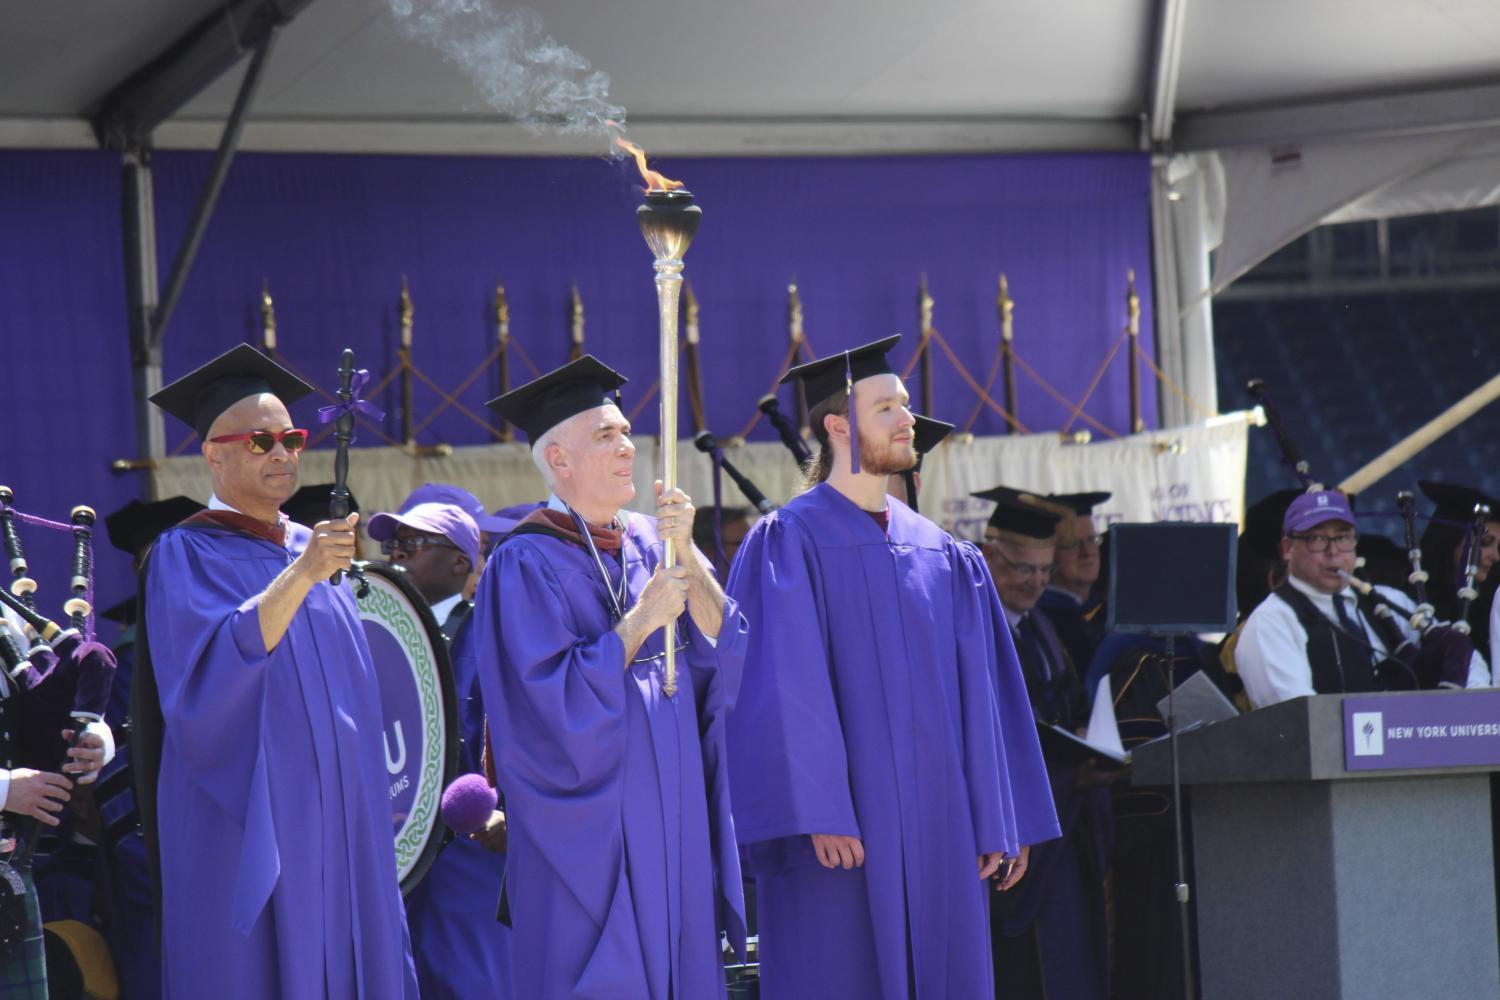 Graduates of 185th Commencement Stand for Honor in the Face of Challenge